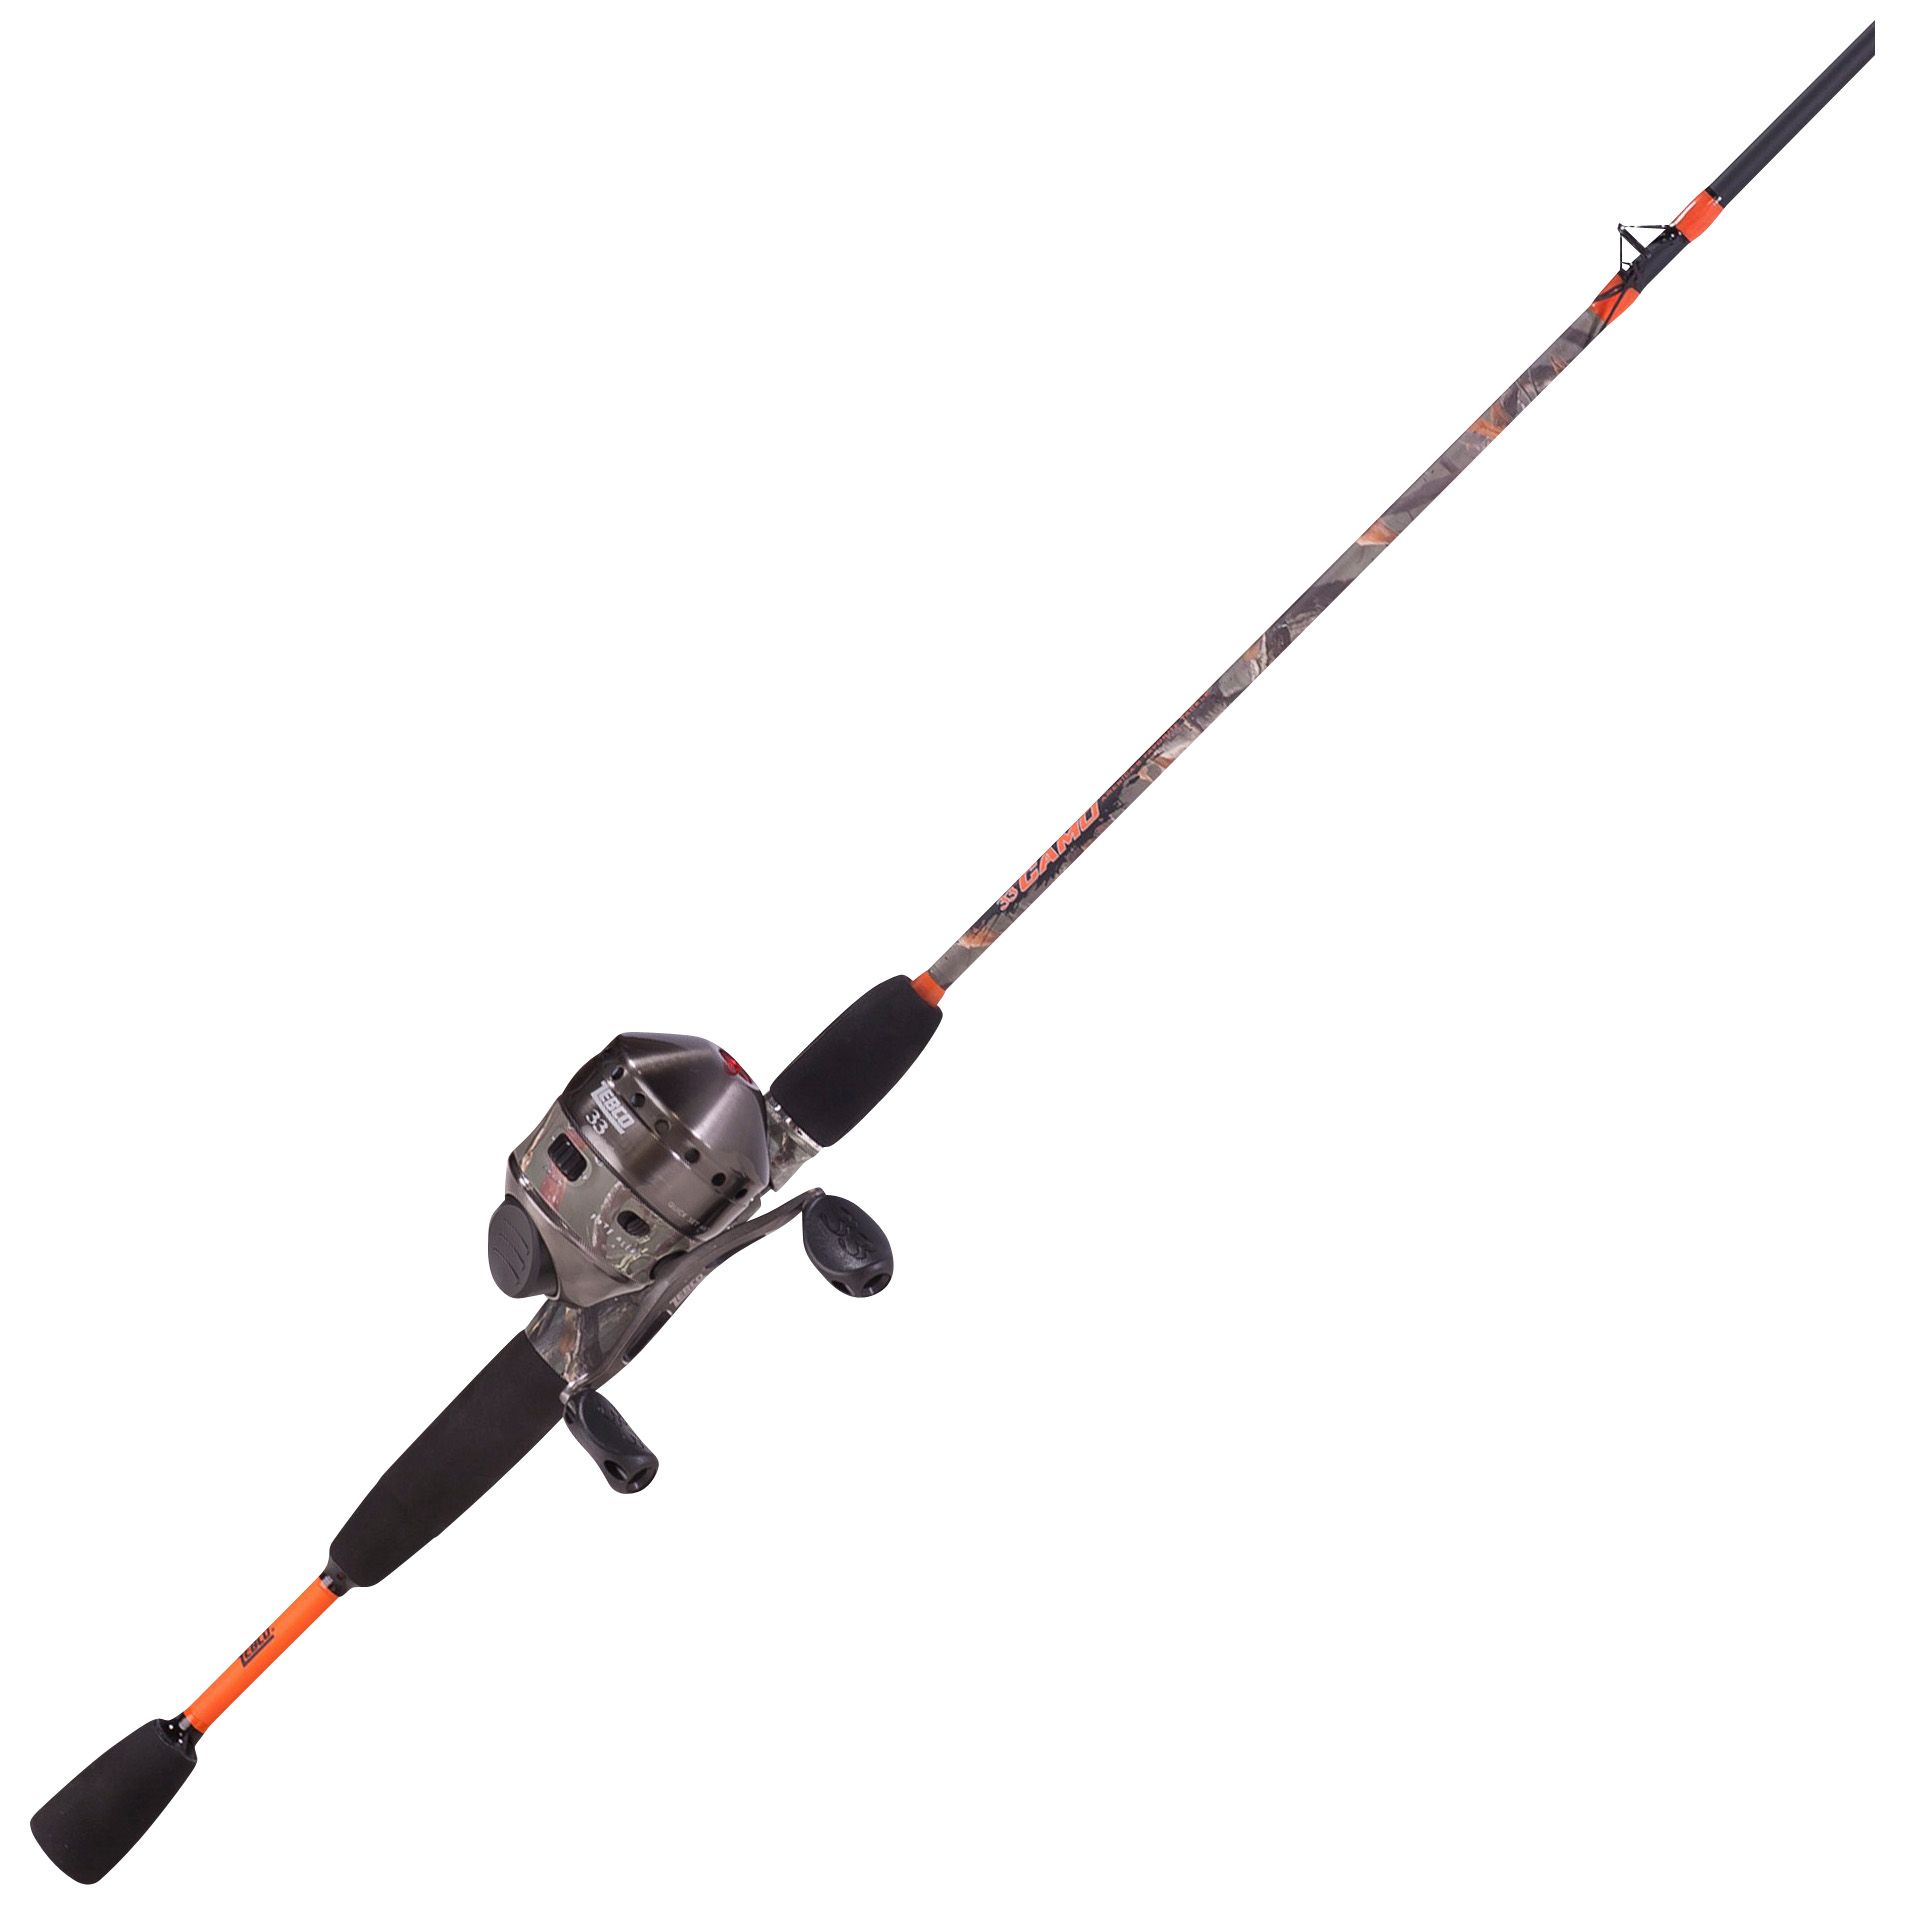 Zebco 33 Lady Camo Pink Rod and Reel Combo Limited Edition 6’ Medium Action 